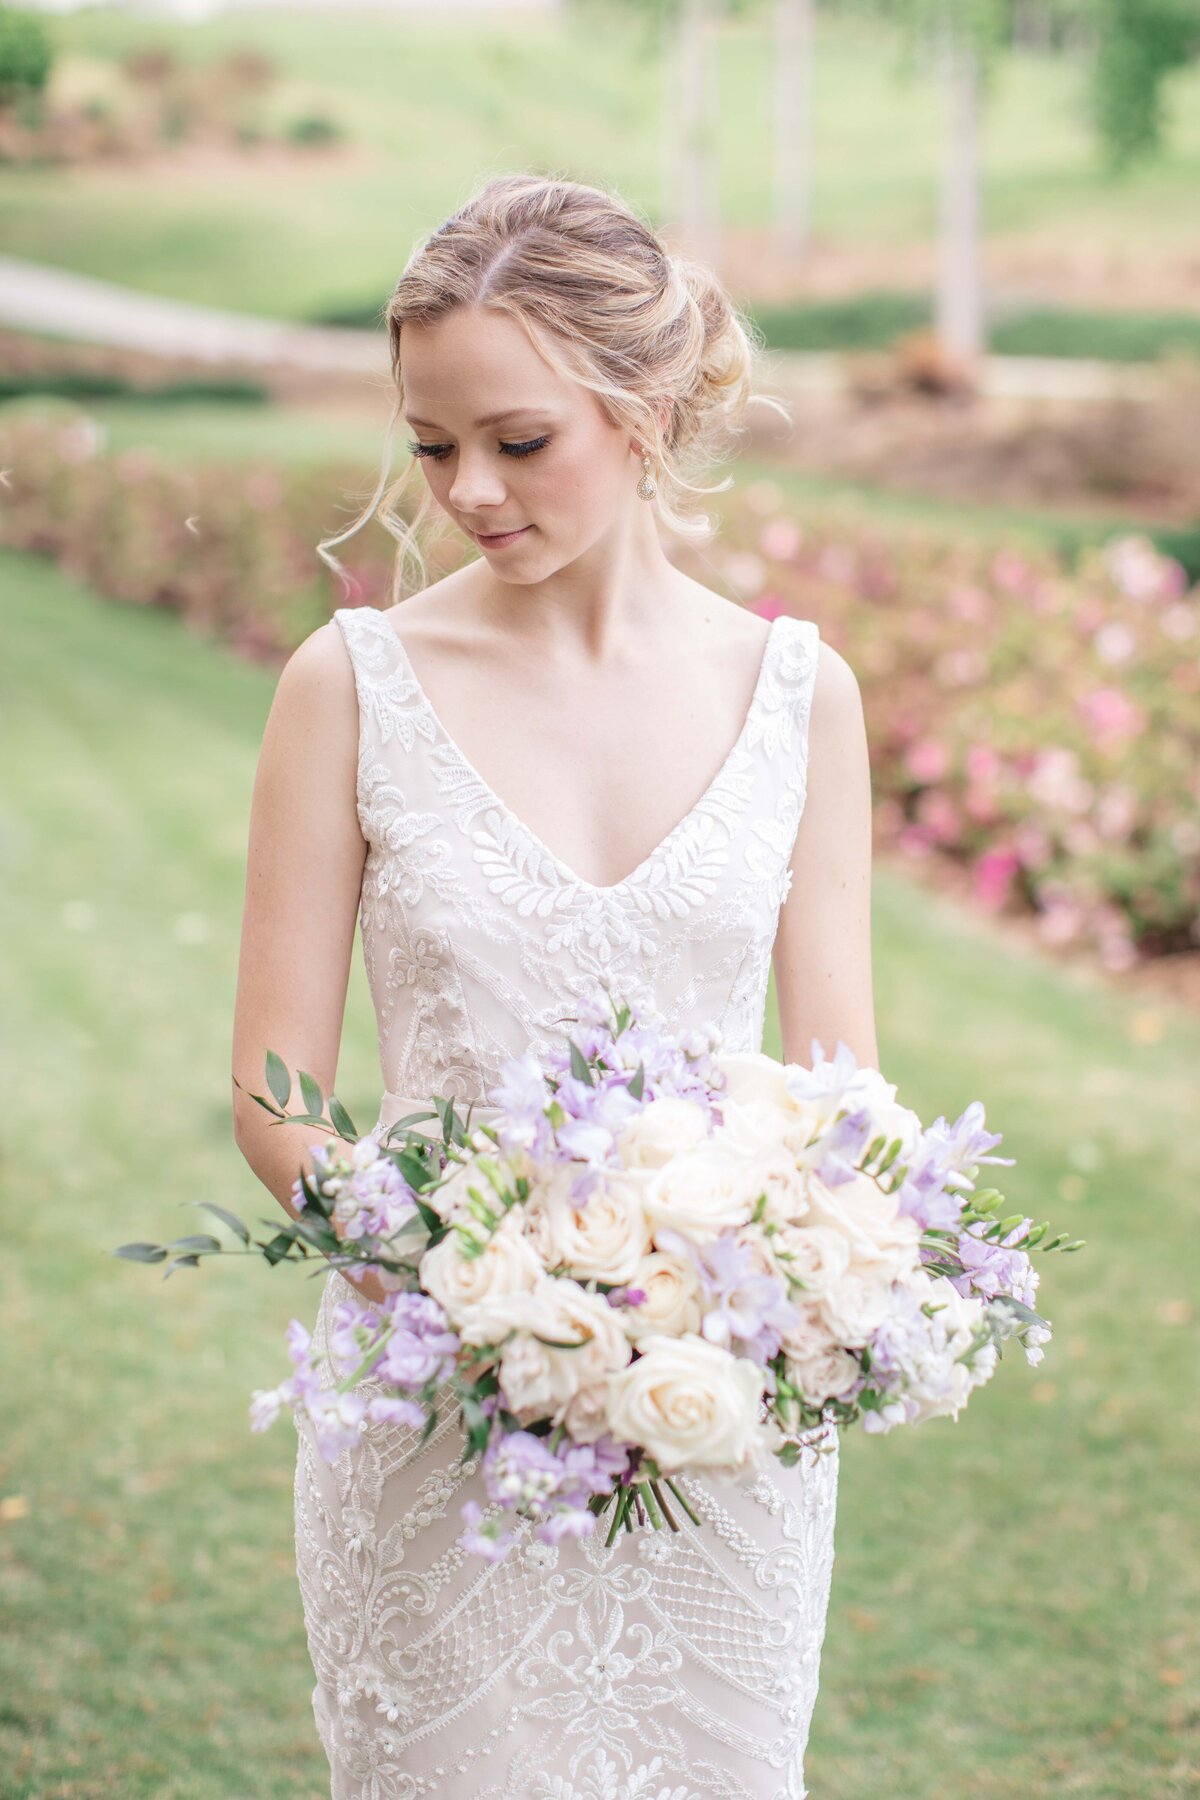 bride holding bouquet with lavender snapdragons by Austin wedding photographer Firefly Photography